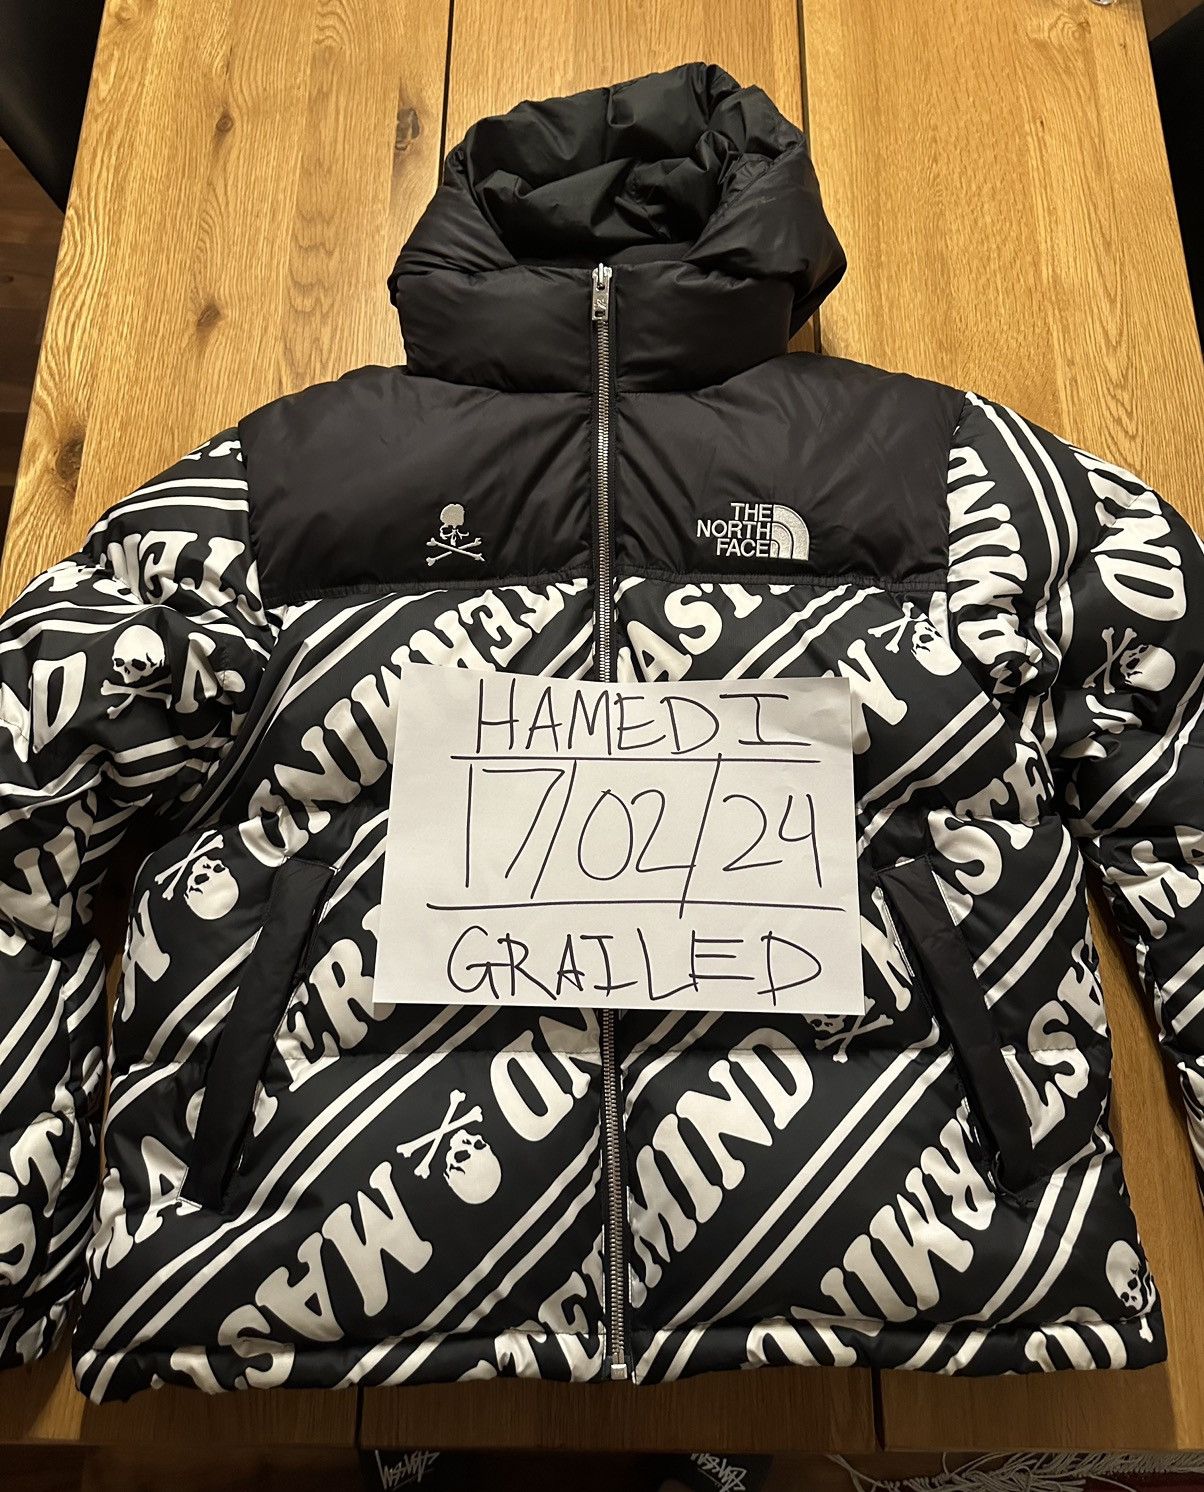 The North Face Mastemind Japan x Mastermind World x The North Face | Grailed